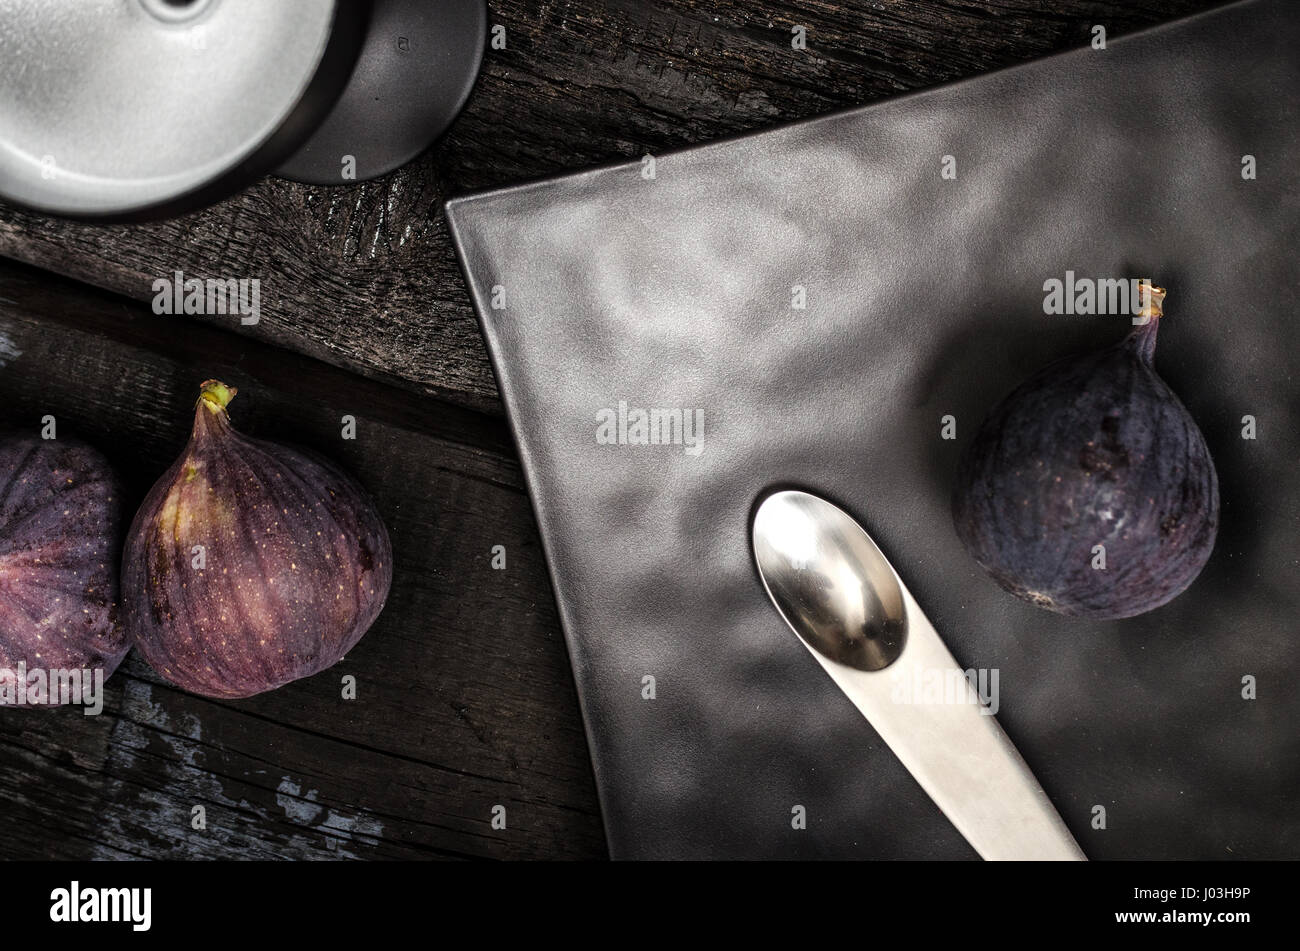 Unusual spoon, black plate and cocktail glass. Figs as decoration. Still life. Stock Photo